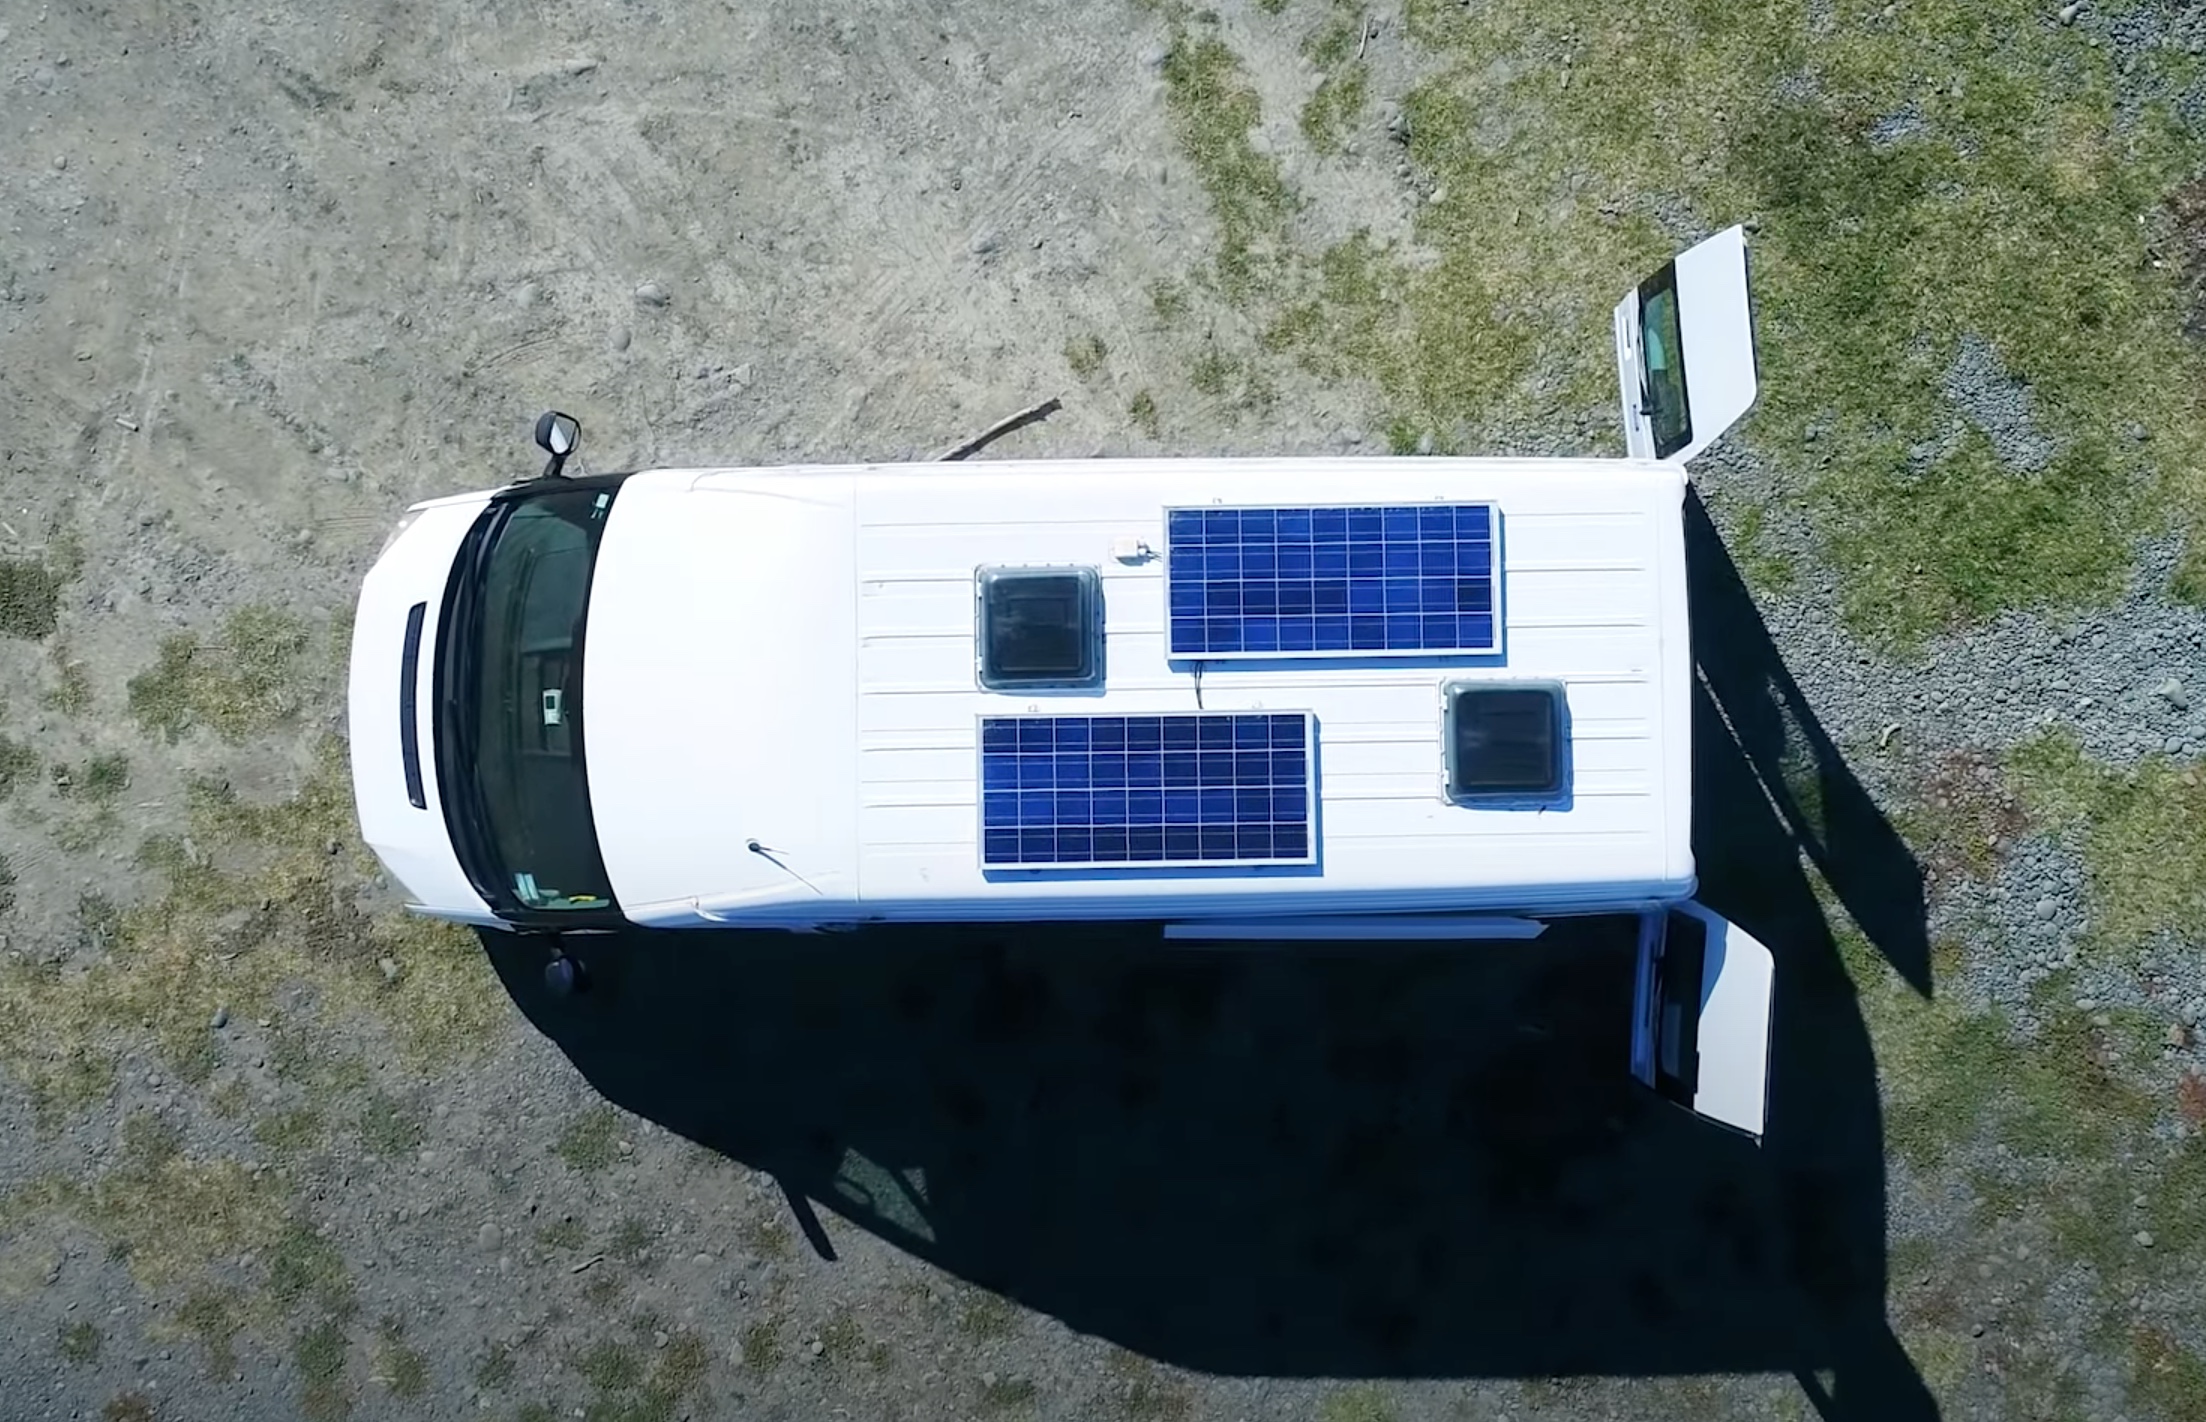 VIDEO: Surfing Electrician Builds Off-Grid Van To Search For Waves